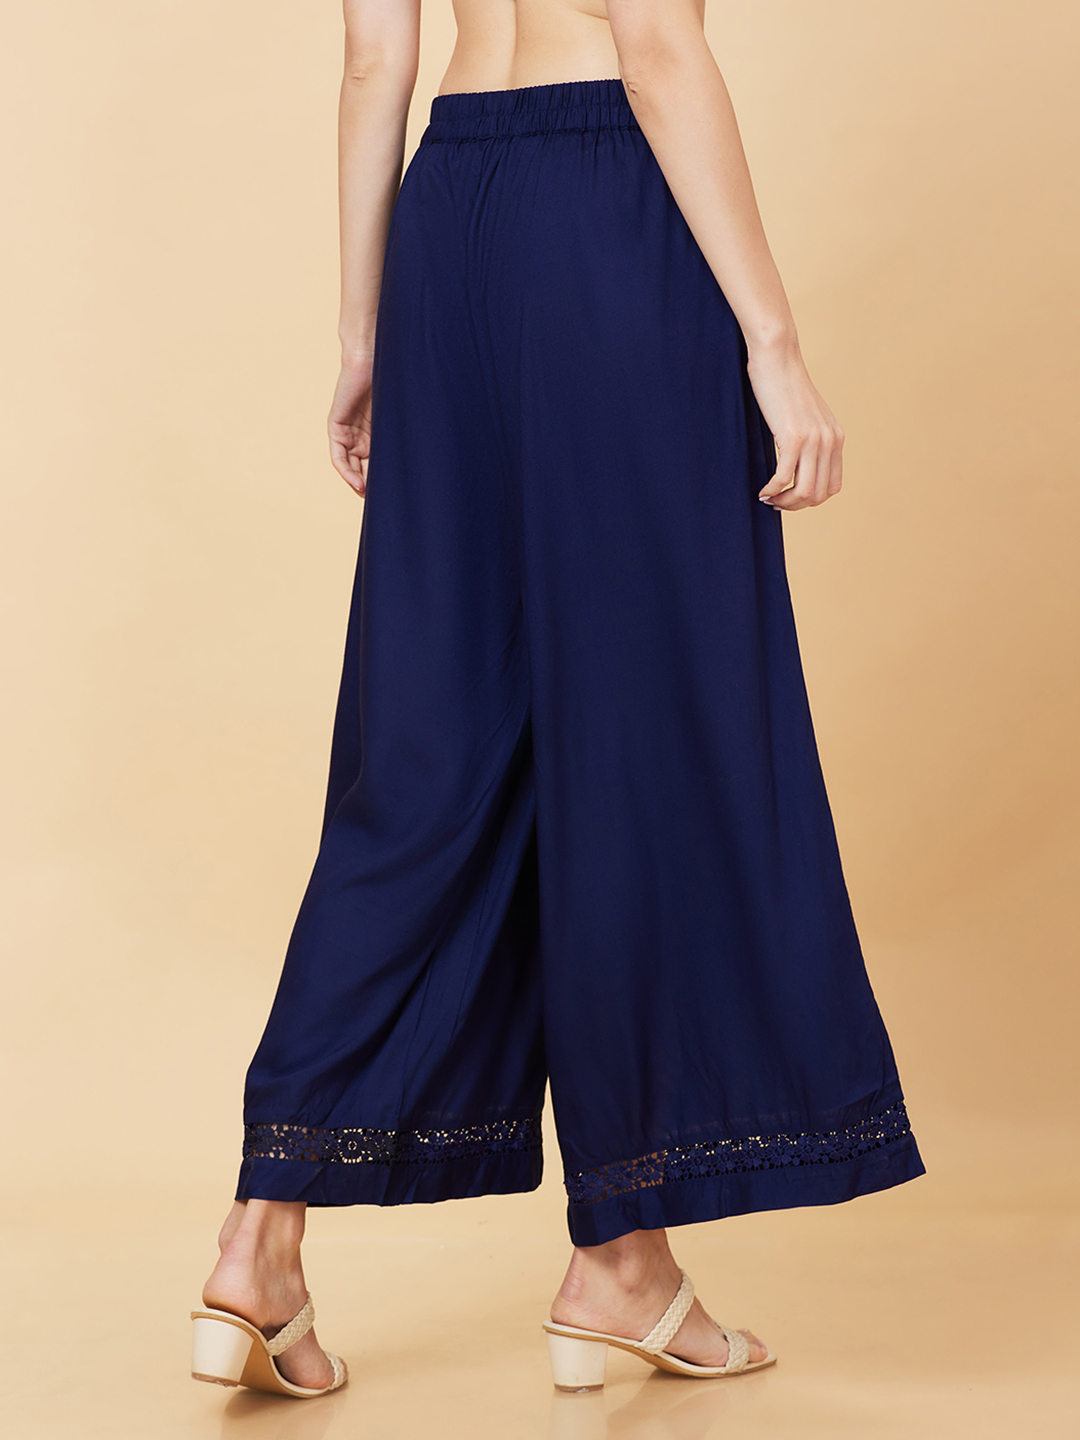 Globus Women Navy Solid Ethnic Wide Leg Palazzo with Lace at Hem